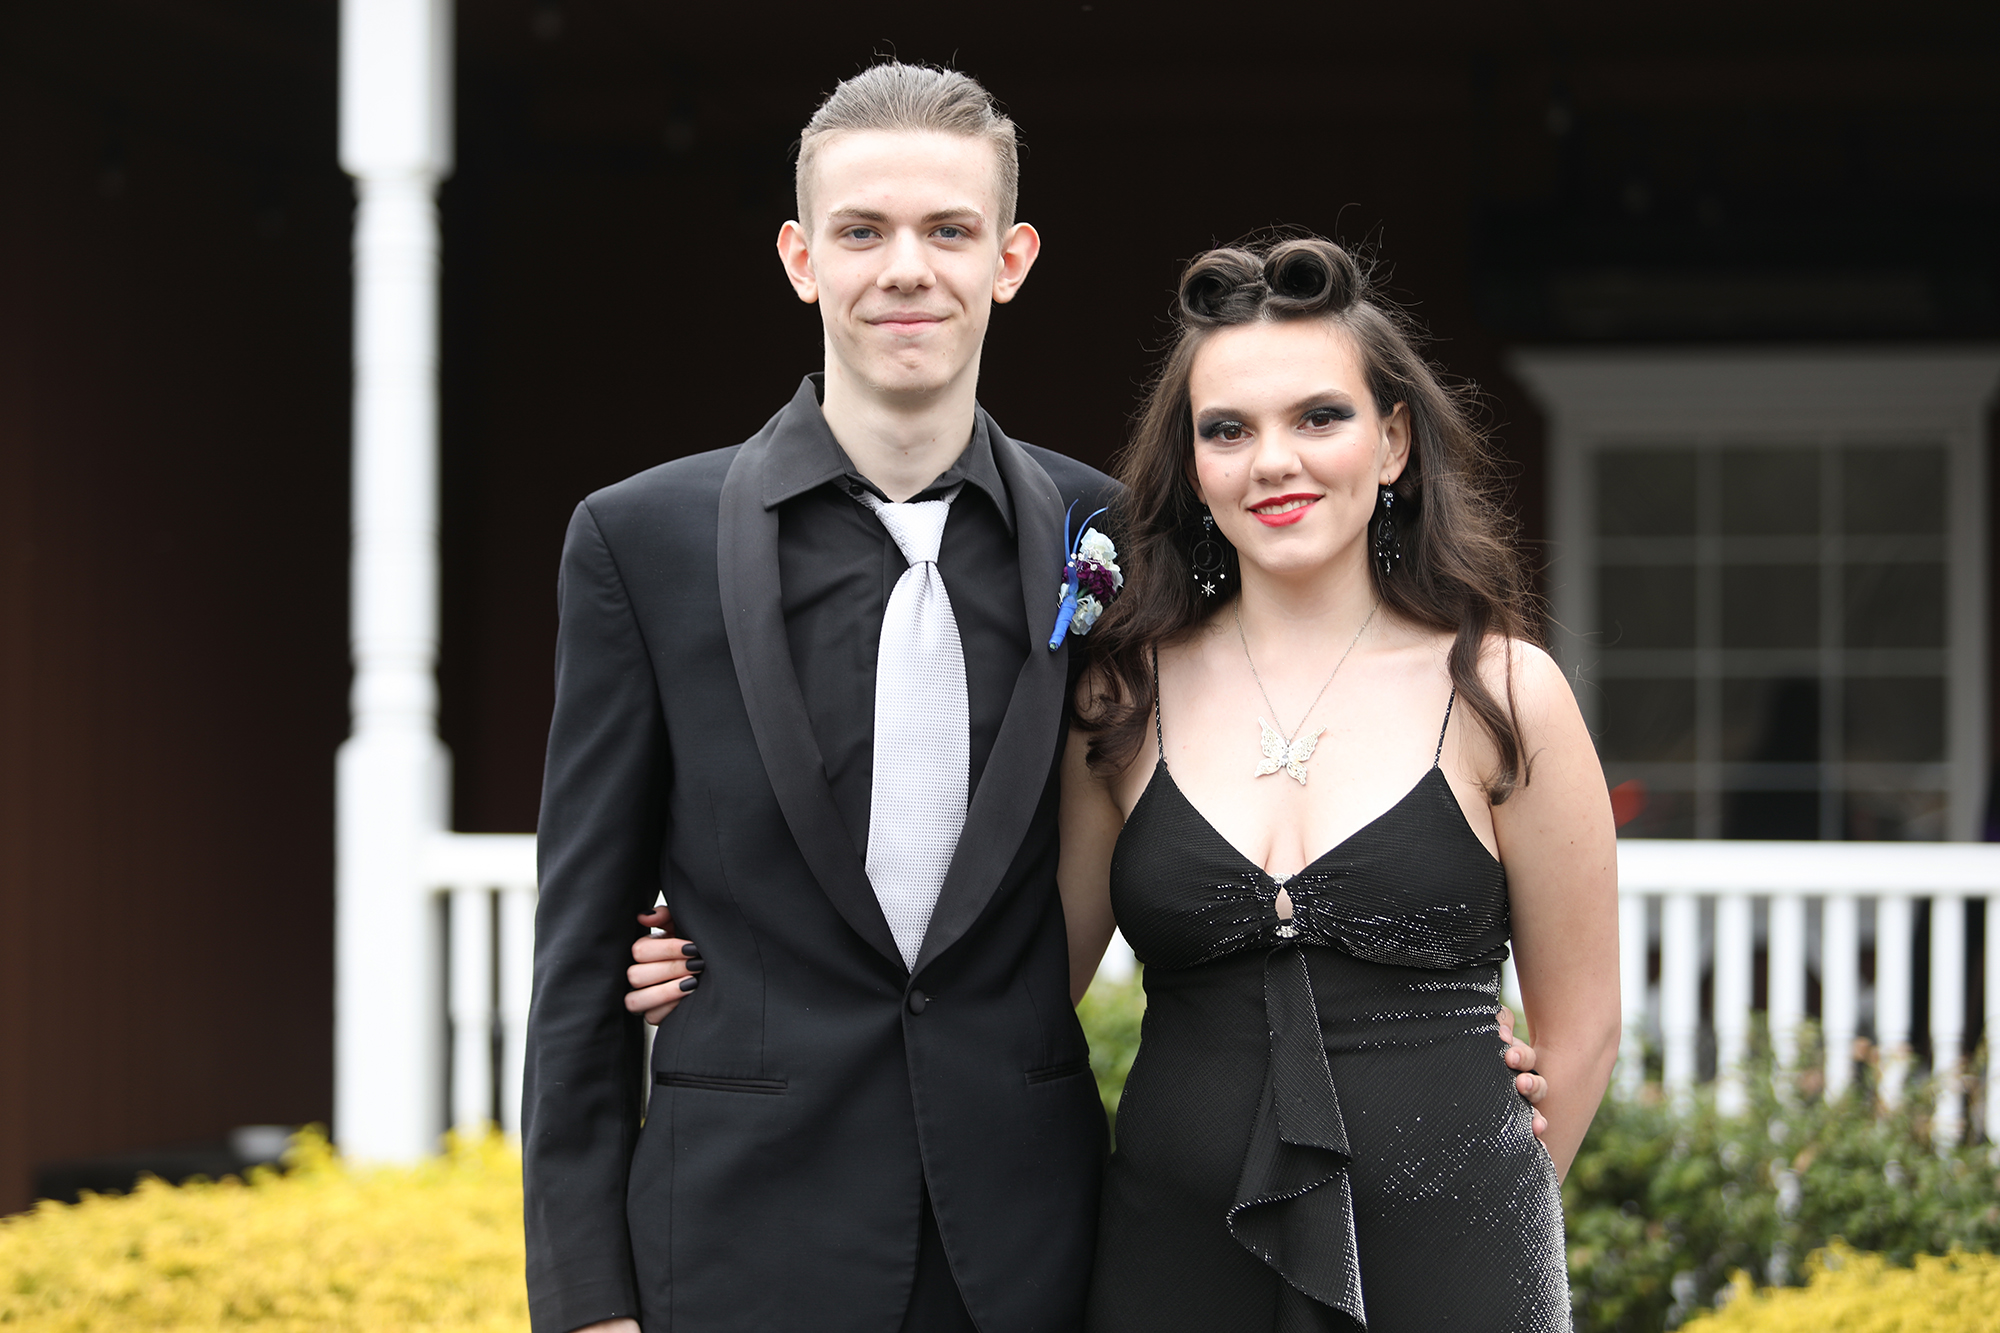 Westfield Technical Academy 2022 prom